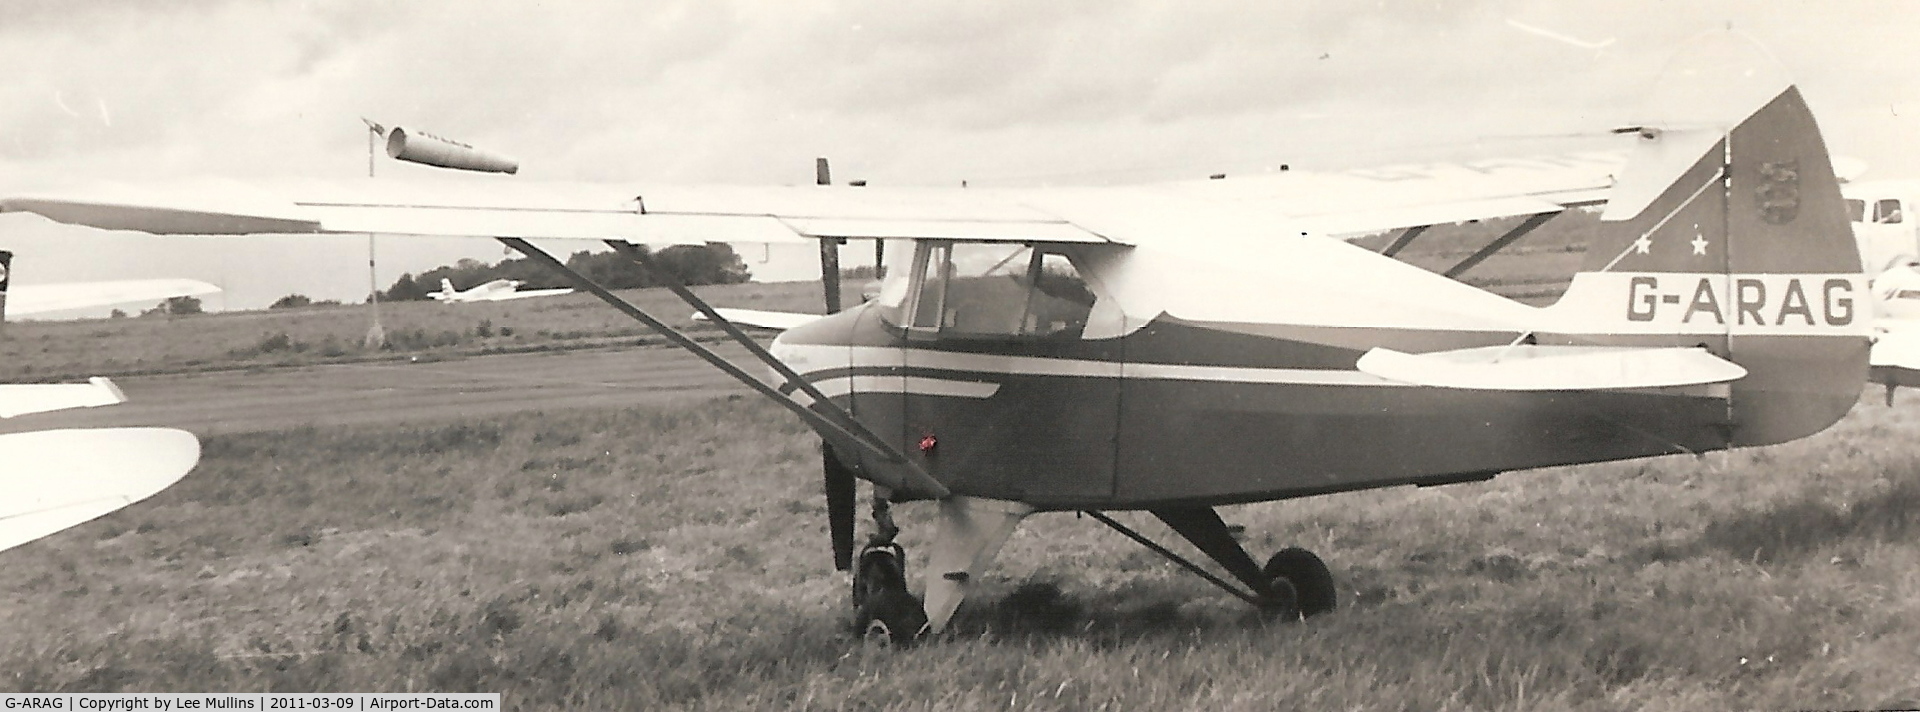 G-ARAG, 1960 Piper PA-22-160 Tri Pacer C/N 22-7348, Photo taken in 1960's in south east England.